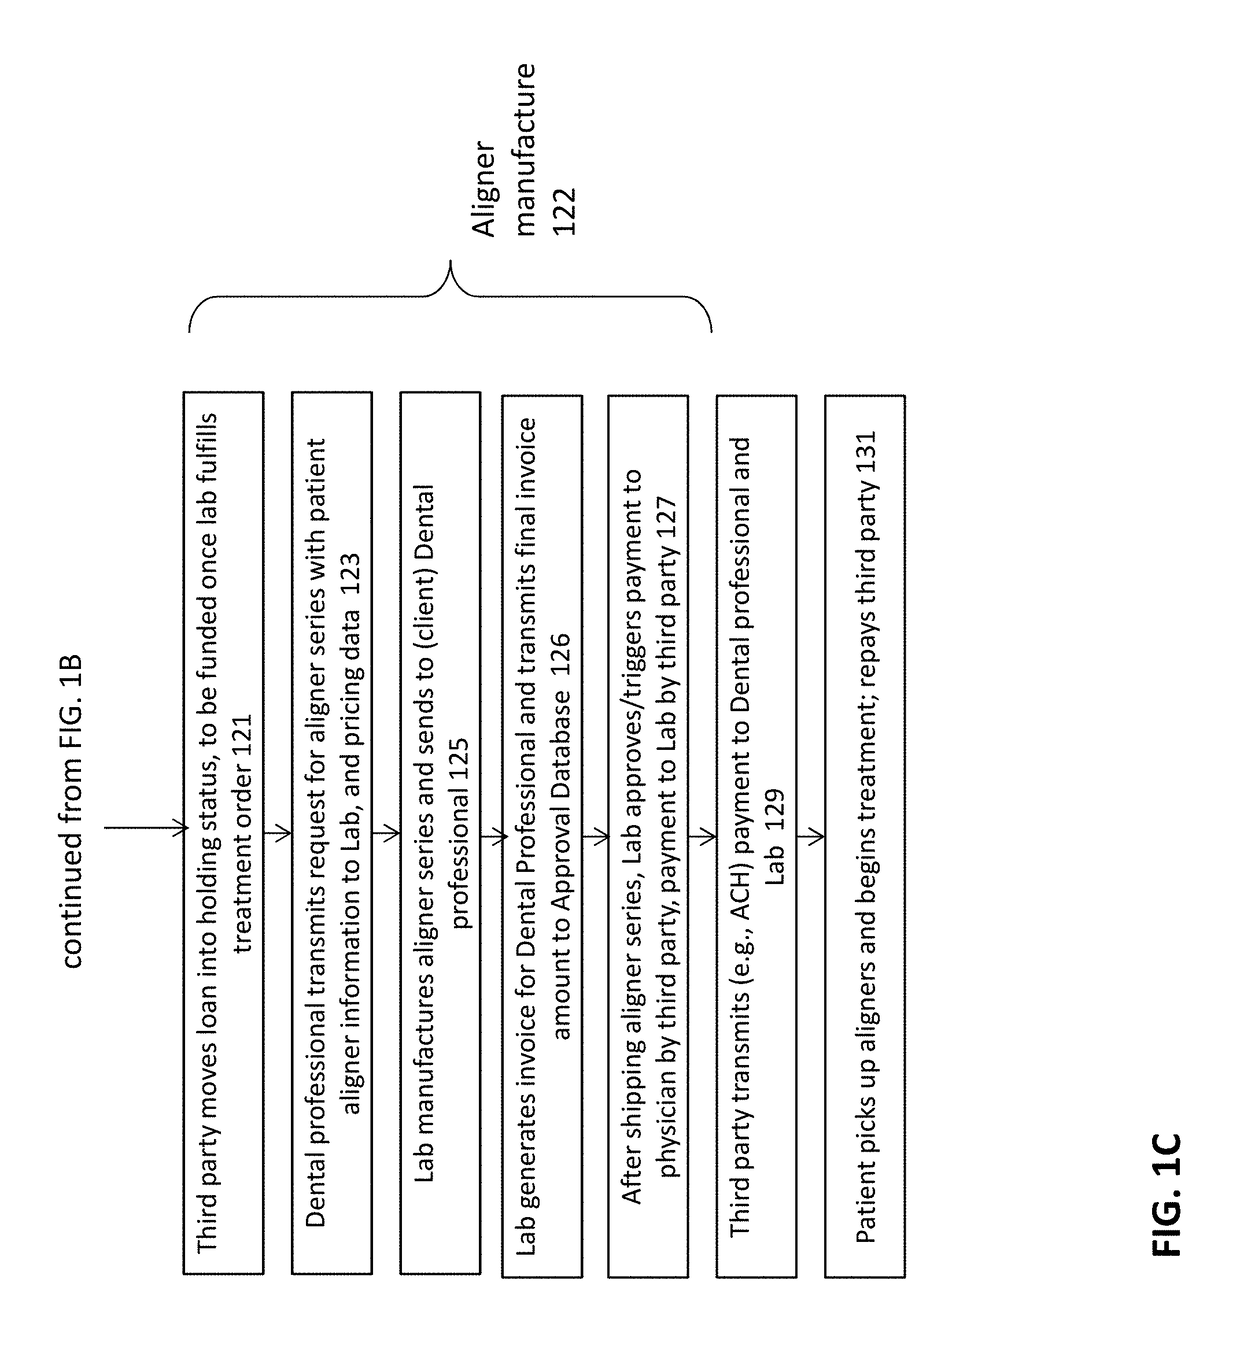 Method and apparatuses for interactive ordering of dental aligners